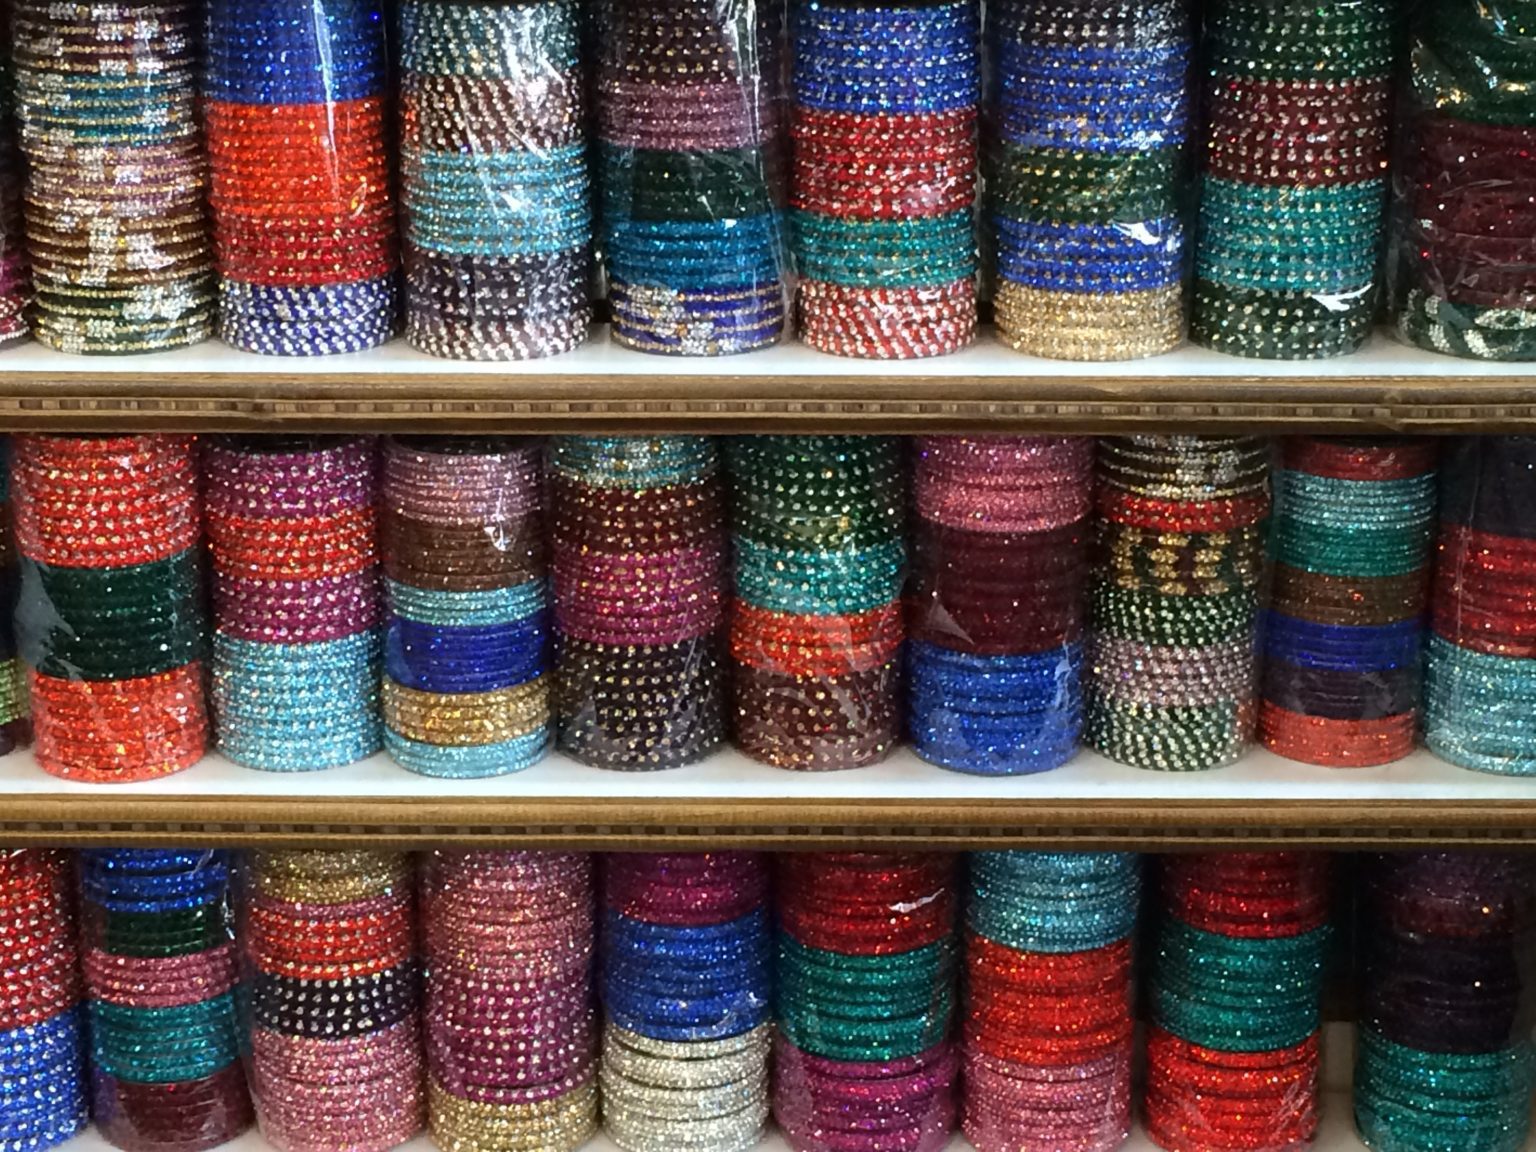 shelves of brightly colored bangles